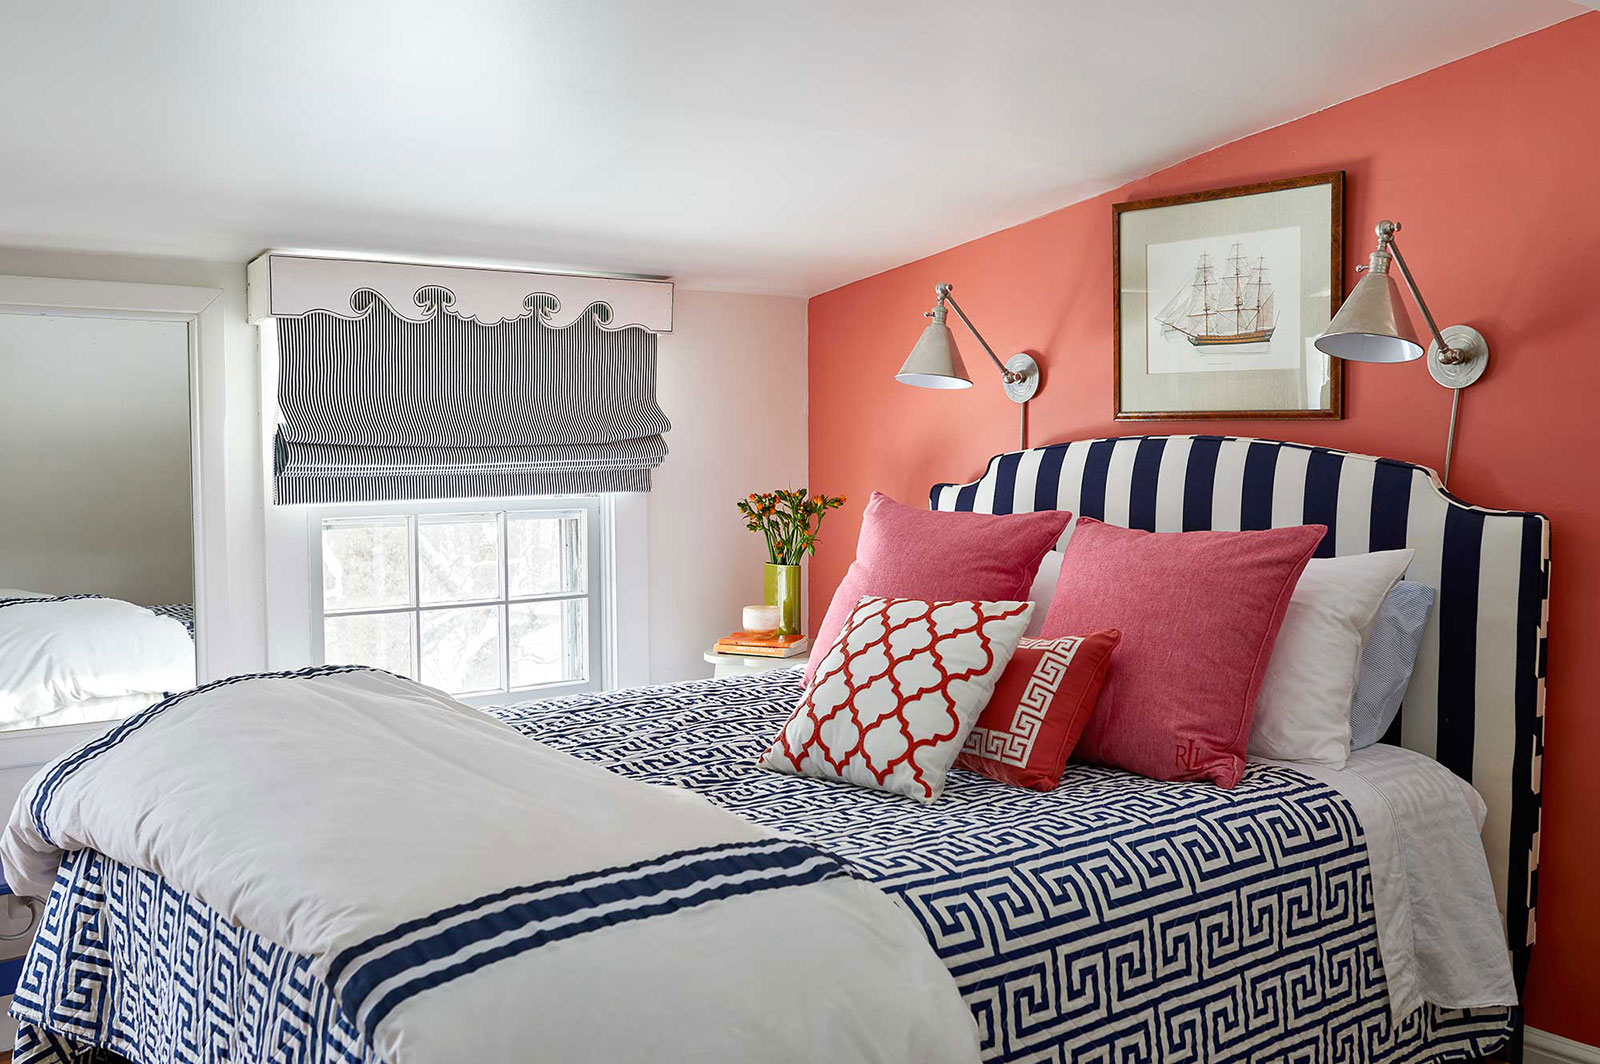 Bedroom in The Manse in Warwick, NY designed by The Red Shutters